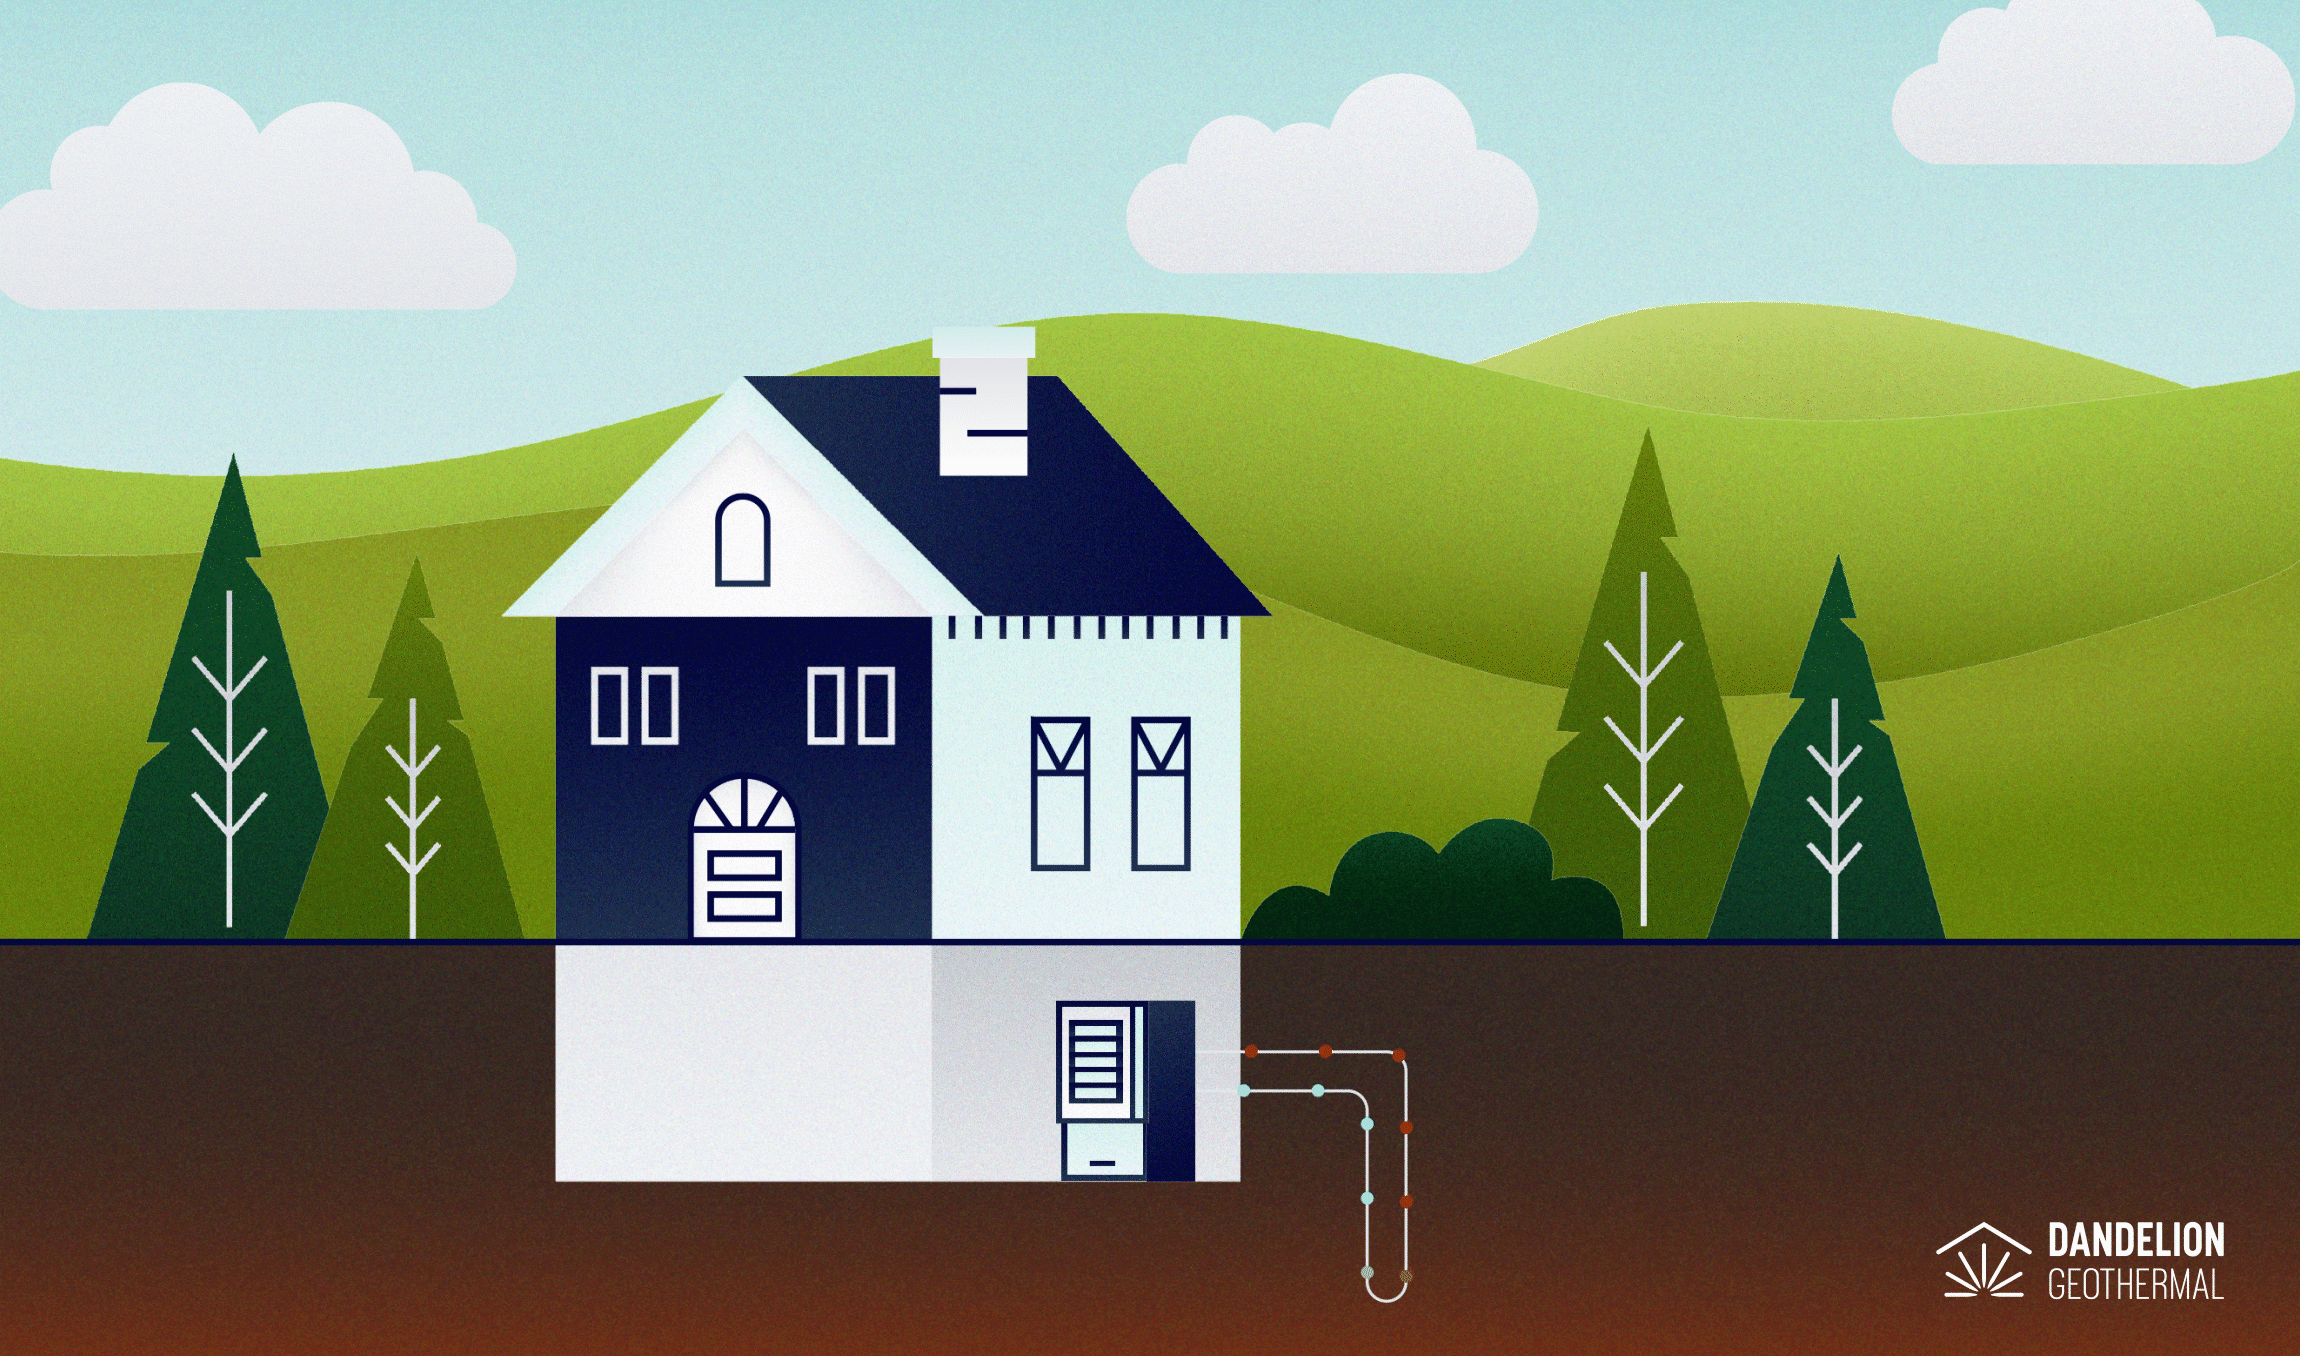 An illustrated picture of a house in front of rolling hills with a geothermal heating unit in the basement, showing little beads running through the ground loops turning from blue to red.